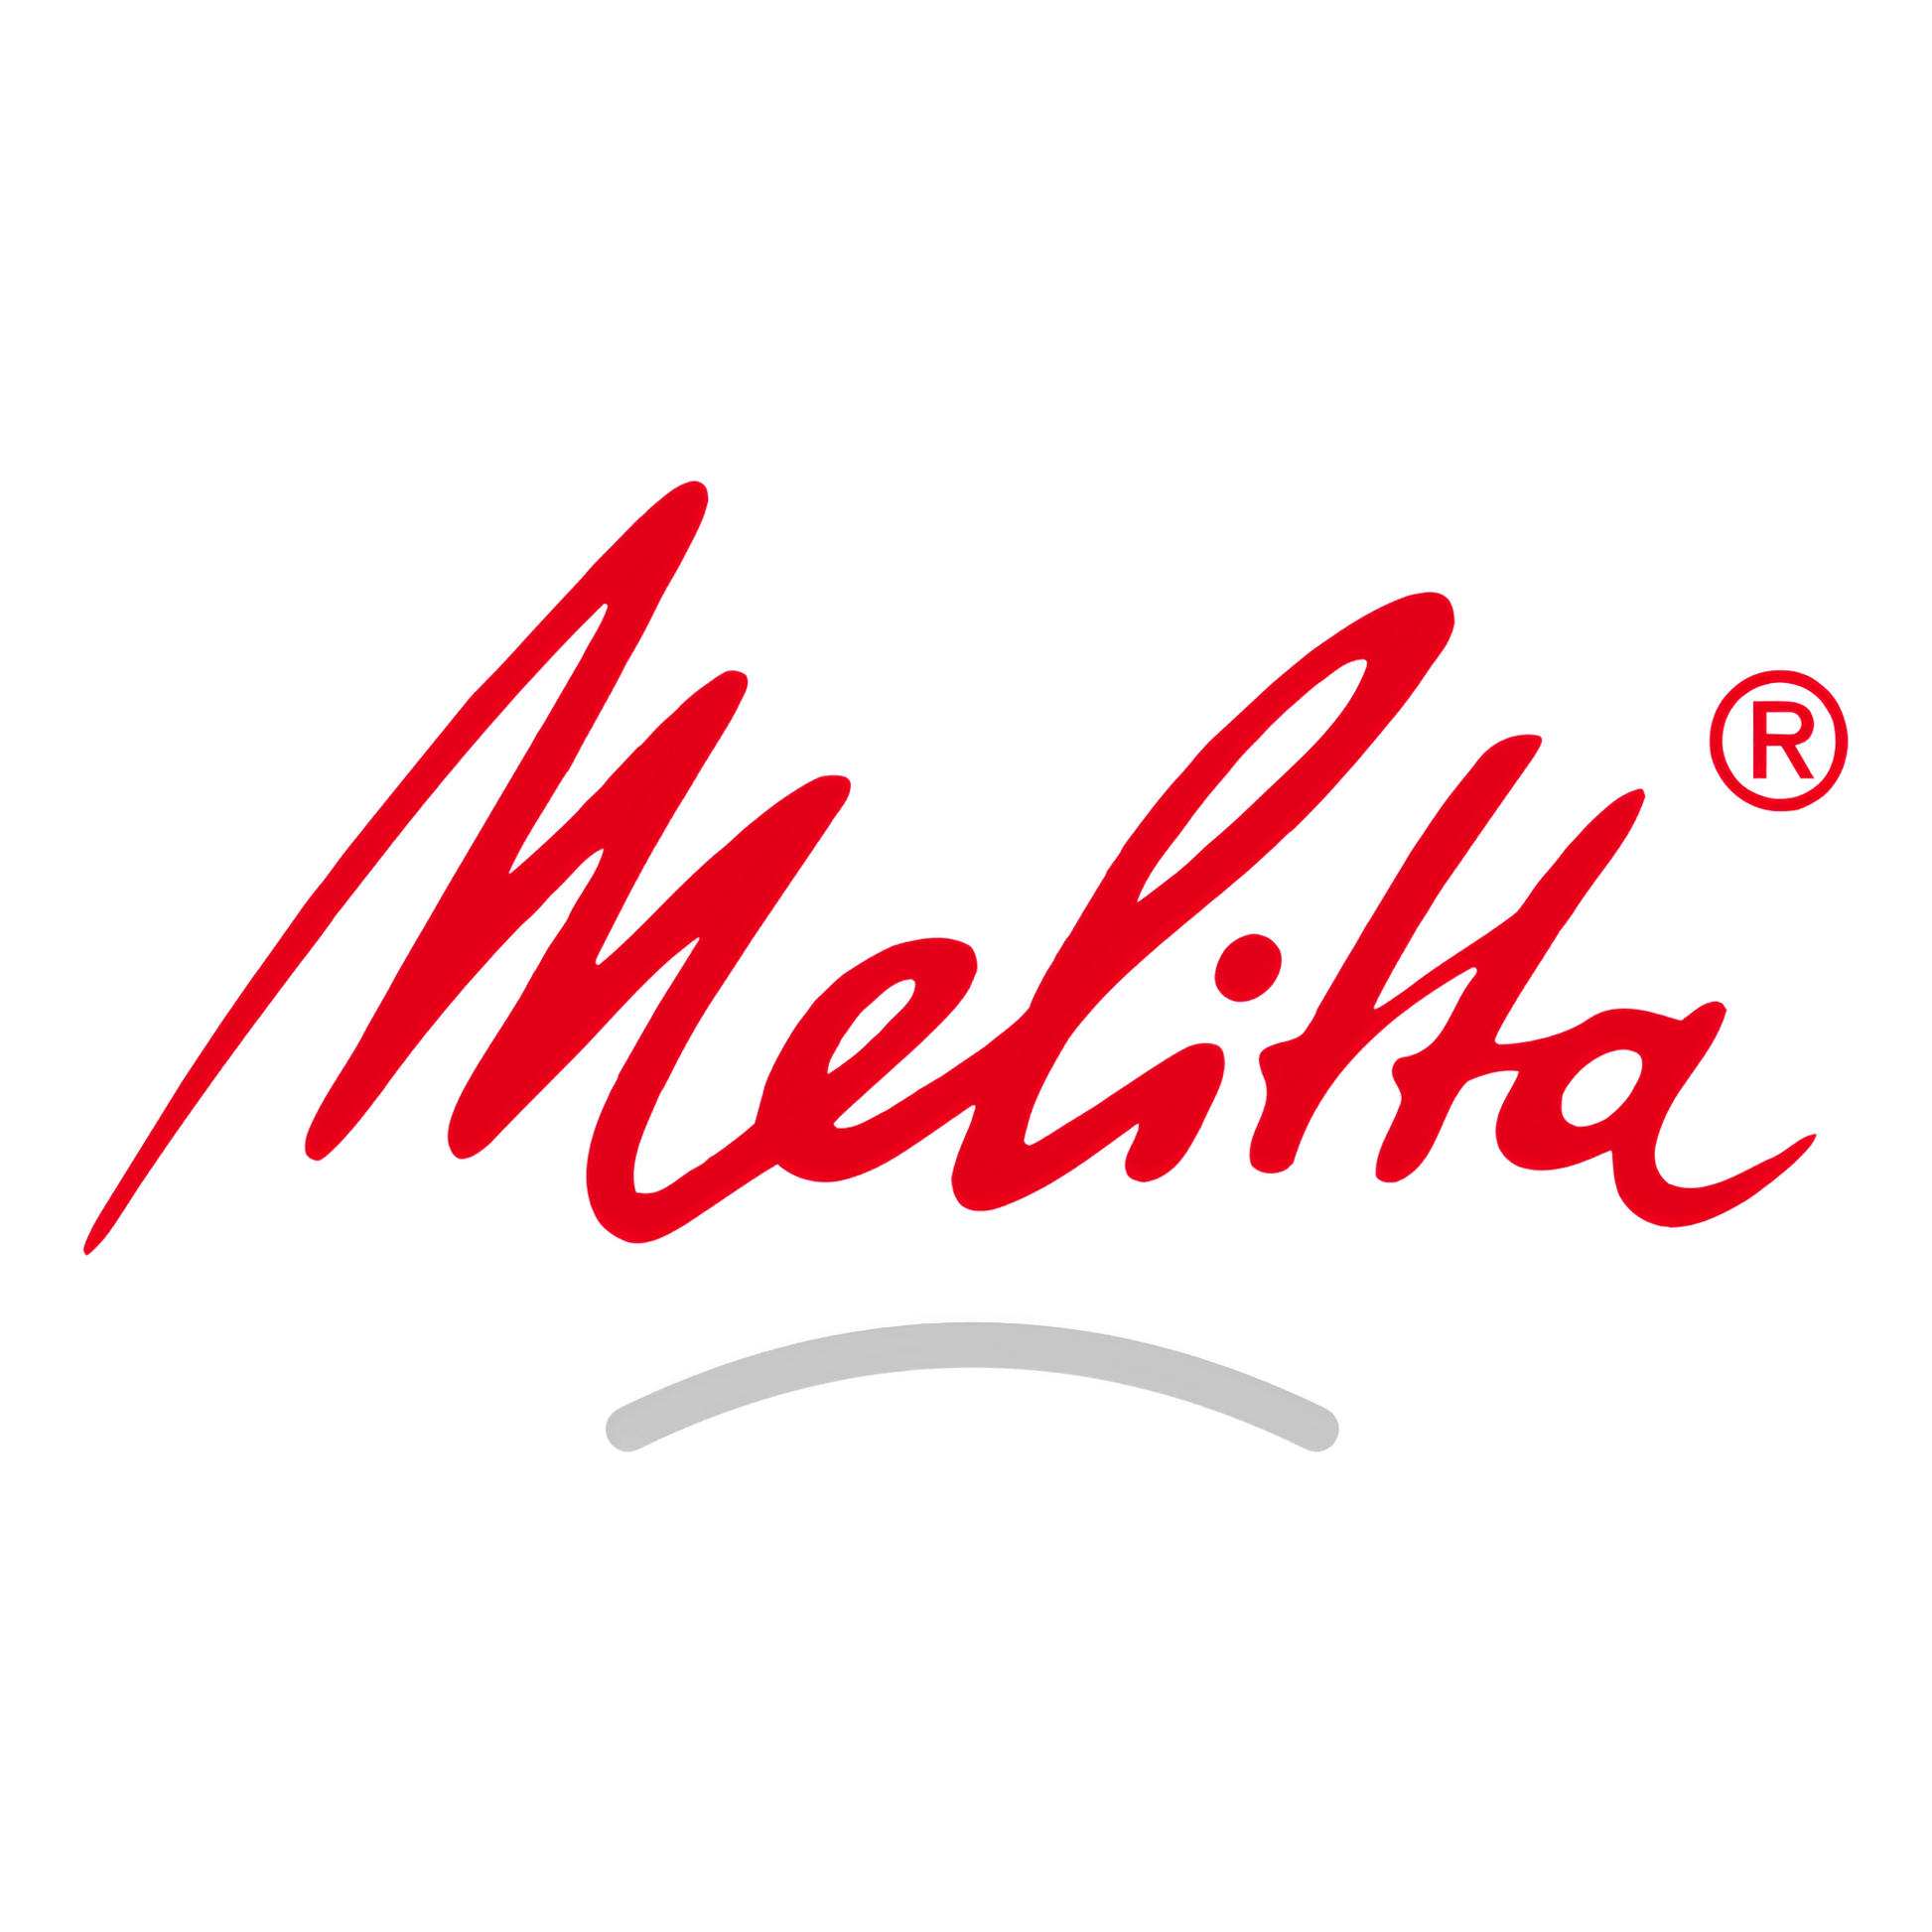 Melitta Extra Strong Coffee Pouch 17.64 oz. (Pack of 2) - Brazilian Shop